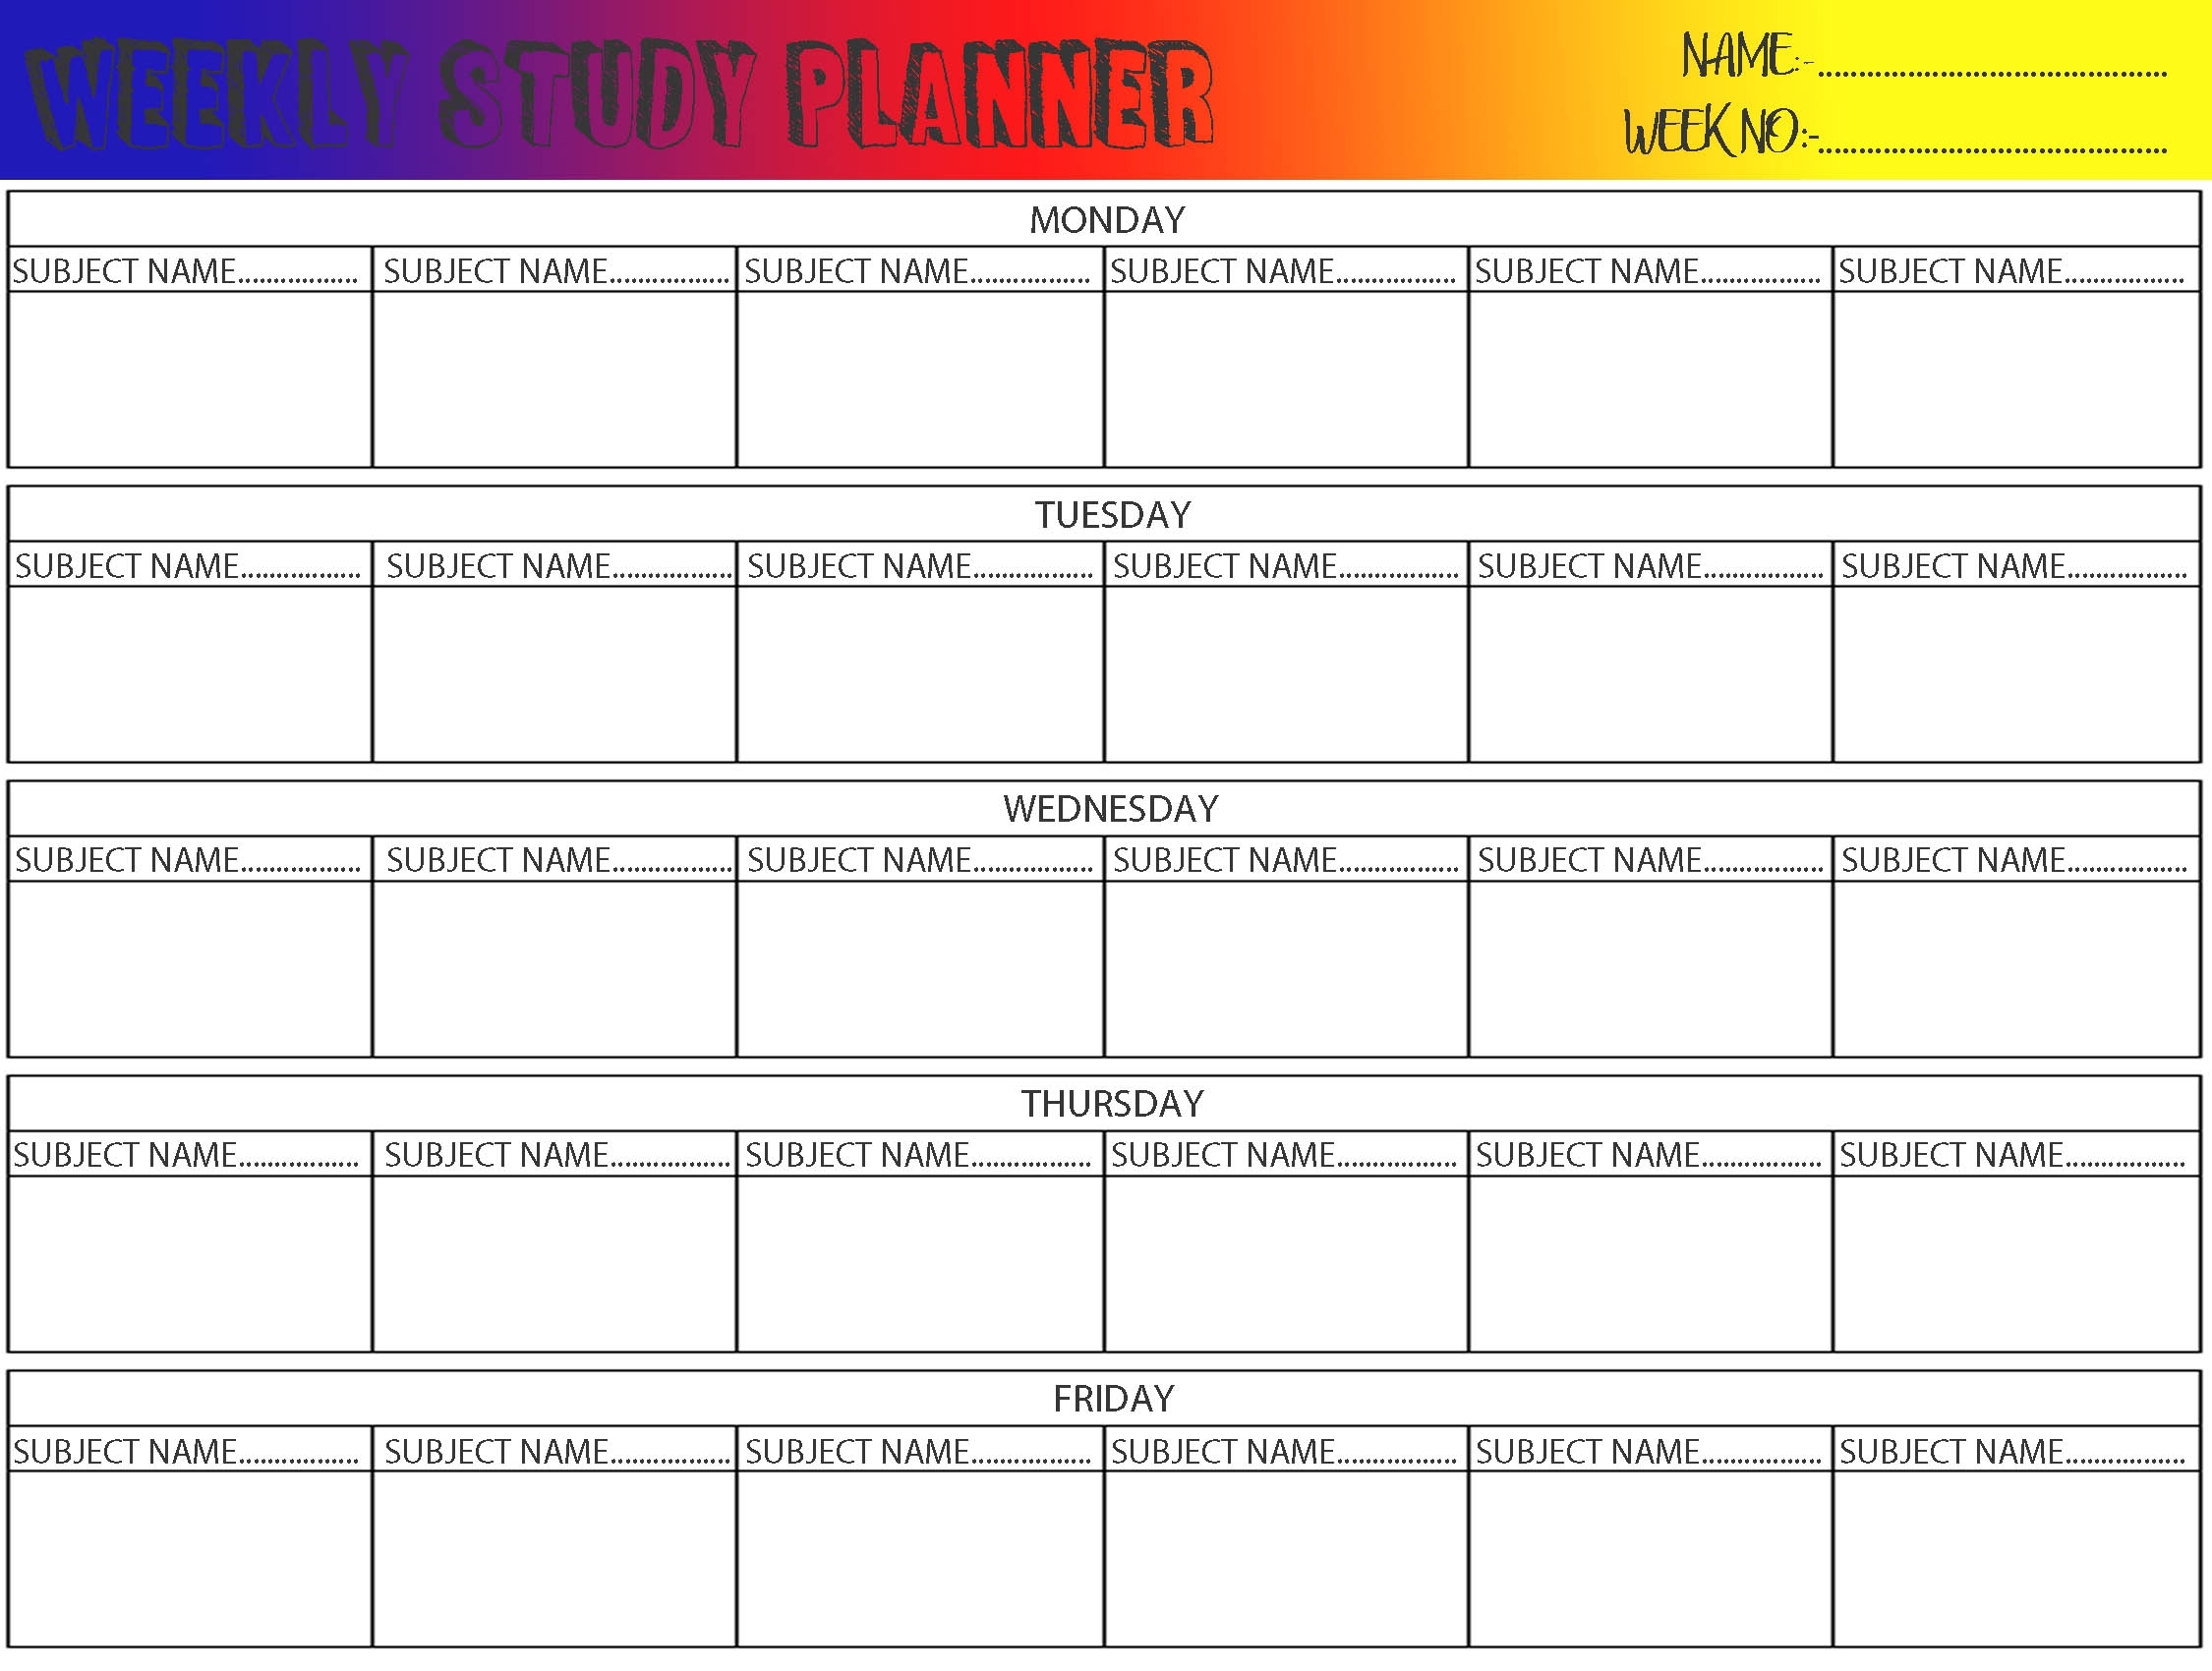 Printable 2019 Study Weekly Planner For Student-Help On Exam Preparation intended for Weekly Planner Template For Students